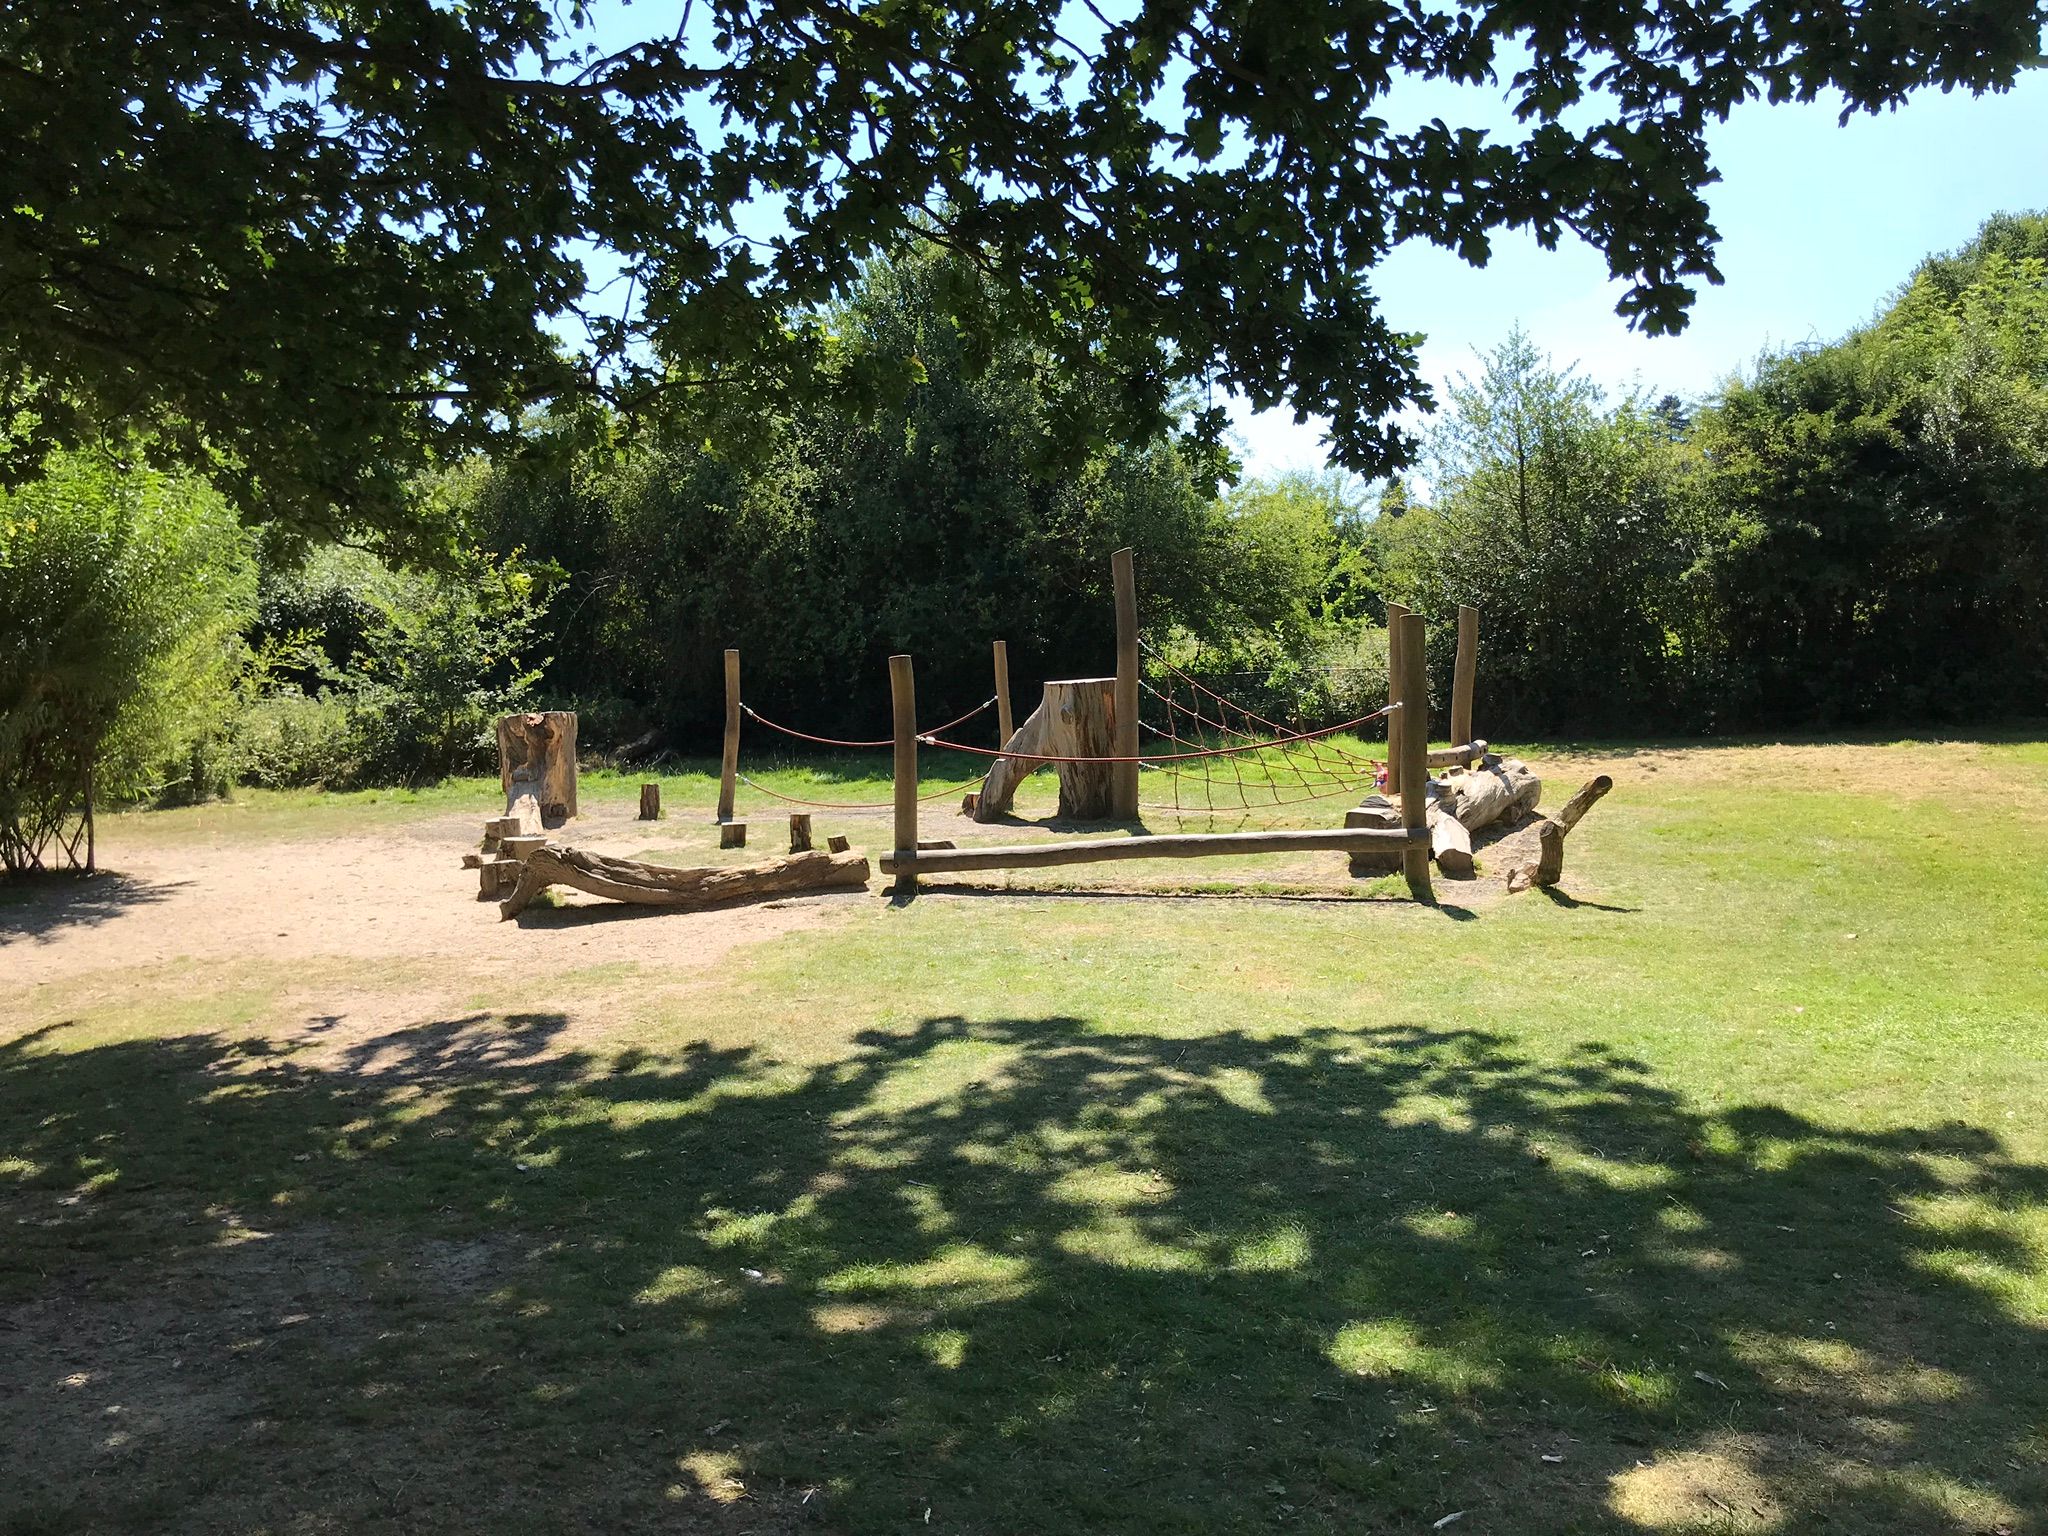 Children's natural play equipment, a series of rope and wooden climbing structures.